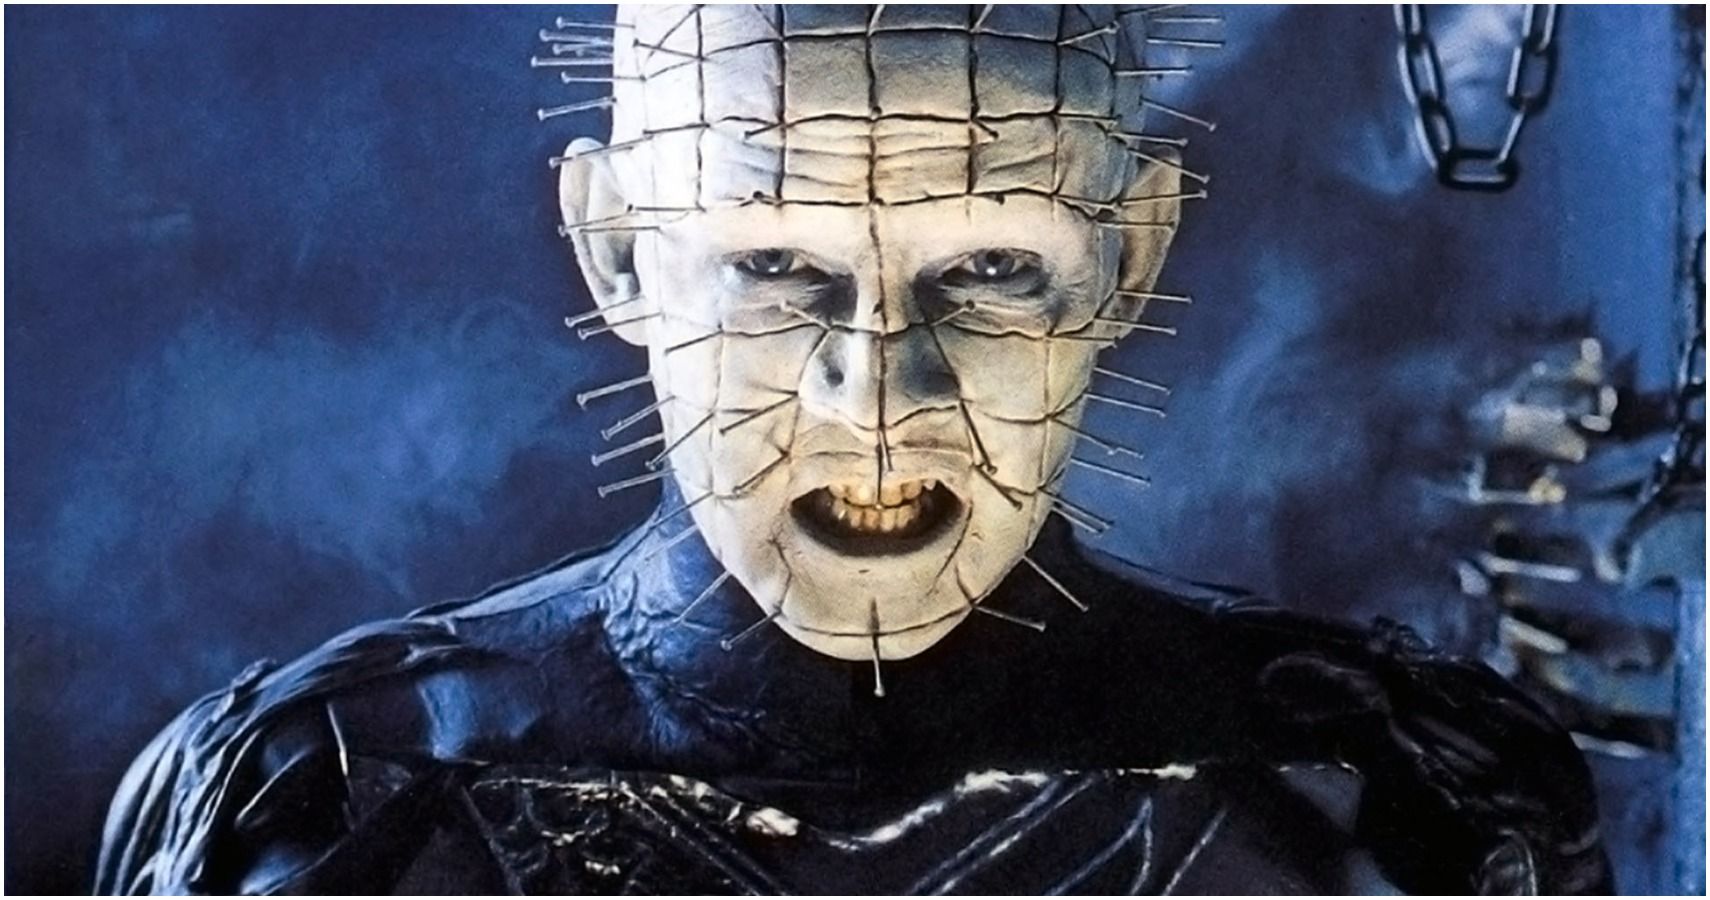 Hellraiser: 10 Reasons Why It's A Criminally Underrated Horror Franchise